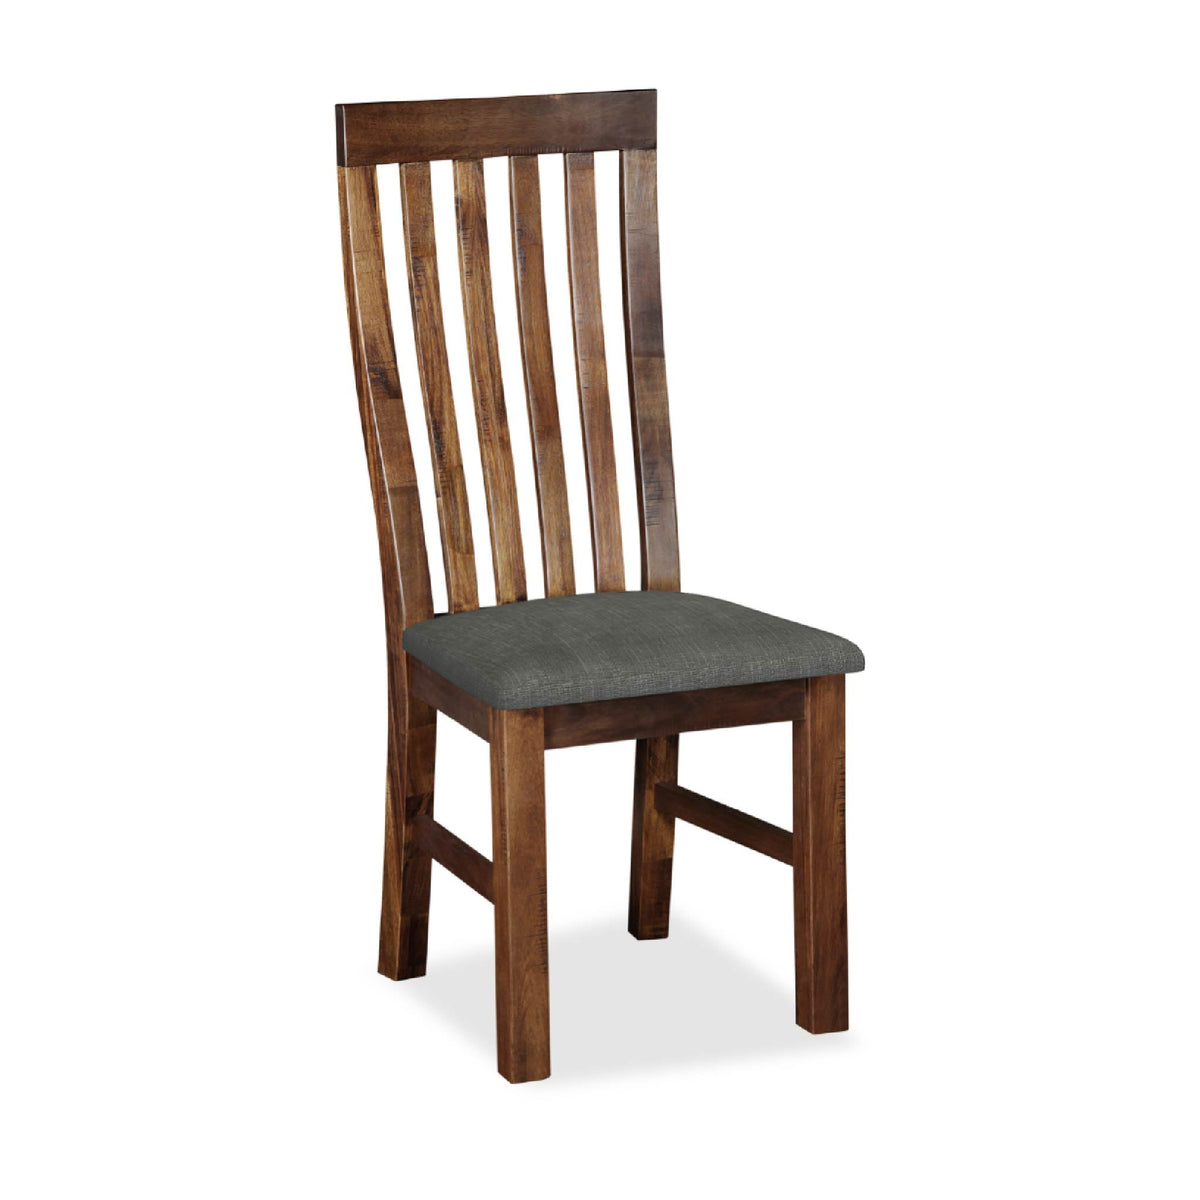 Ladock Dining Chair by Roseland Furniture